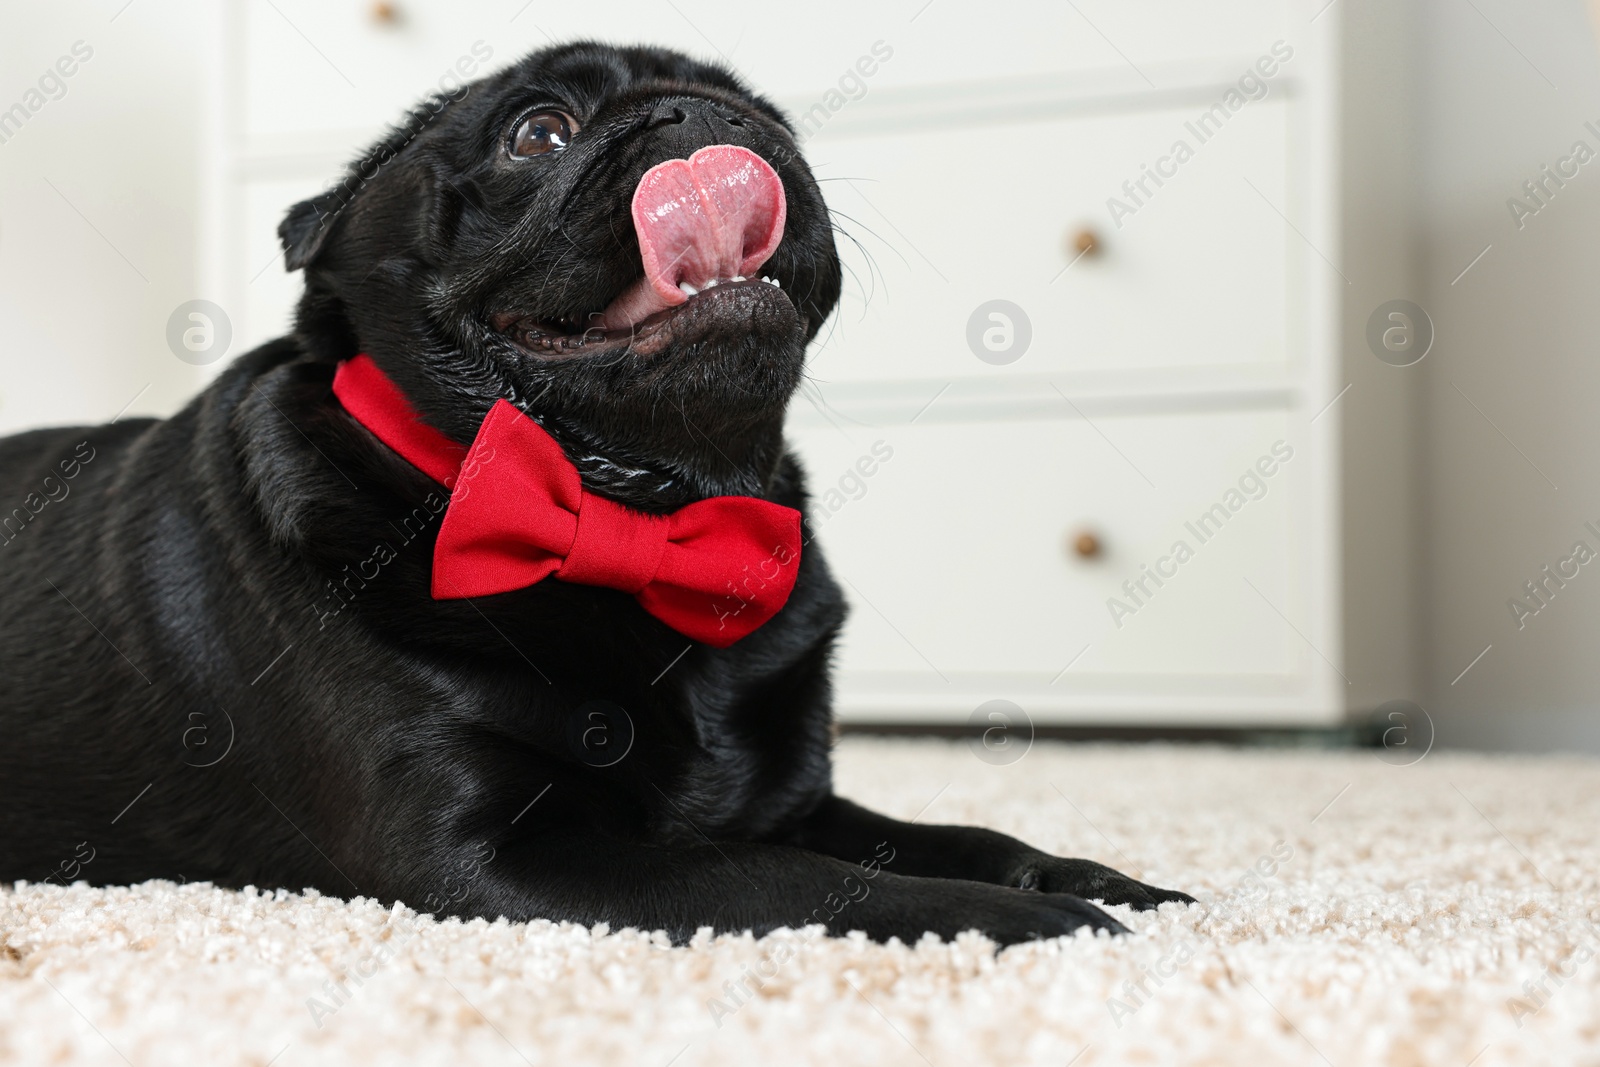 Photo of Cute Pug dog with red bow tie on neck in room, space for text